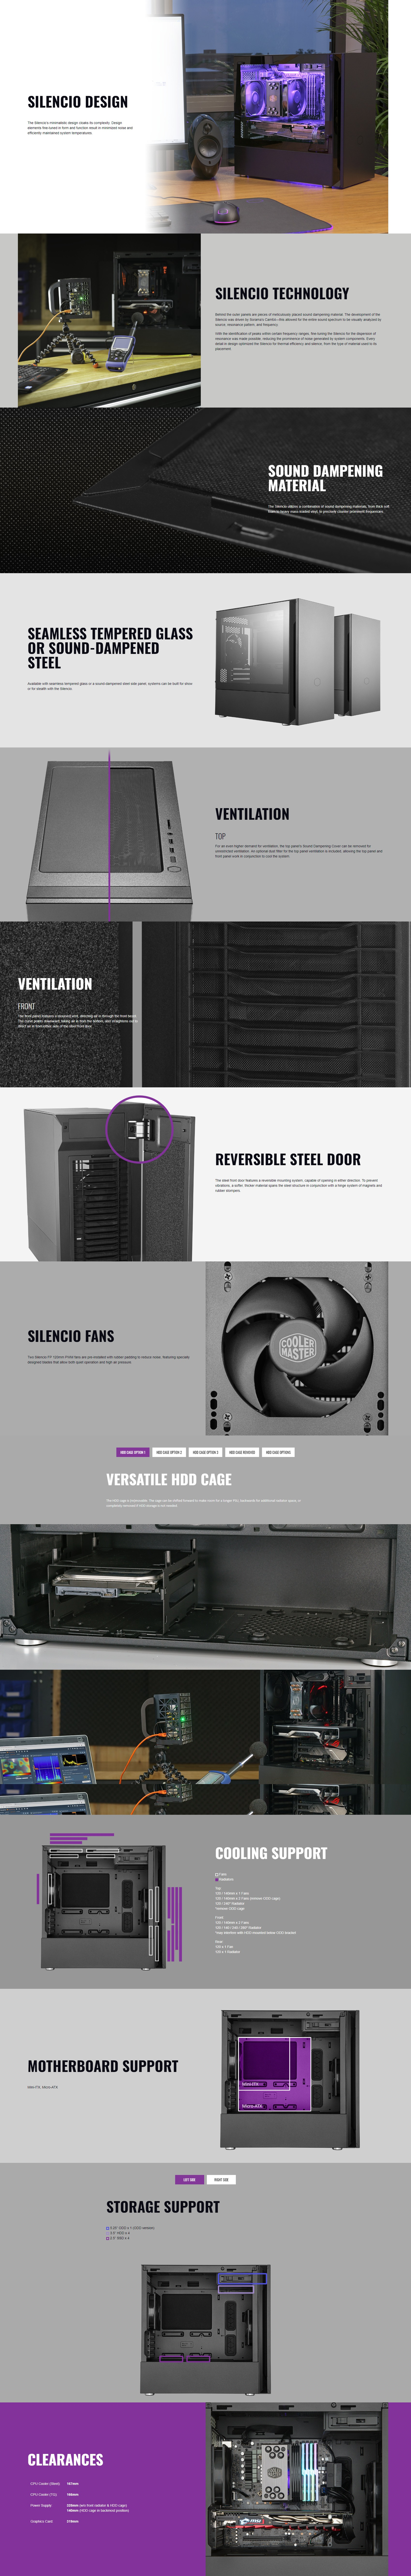 A large marketing image providing additional information about the product Cooler Master Silencio S400 TG Micro Tower Case - Black - Additional alt info not provided